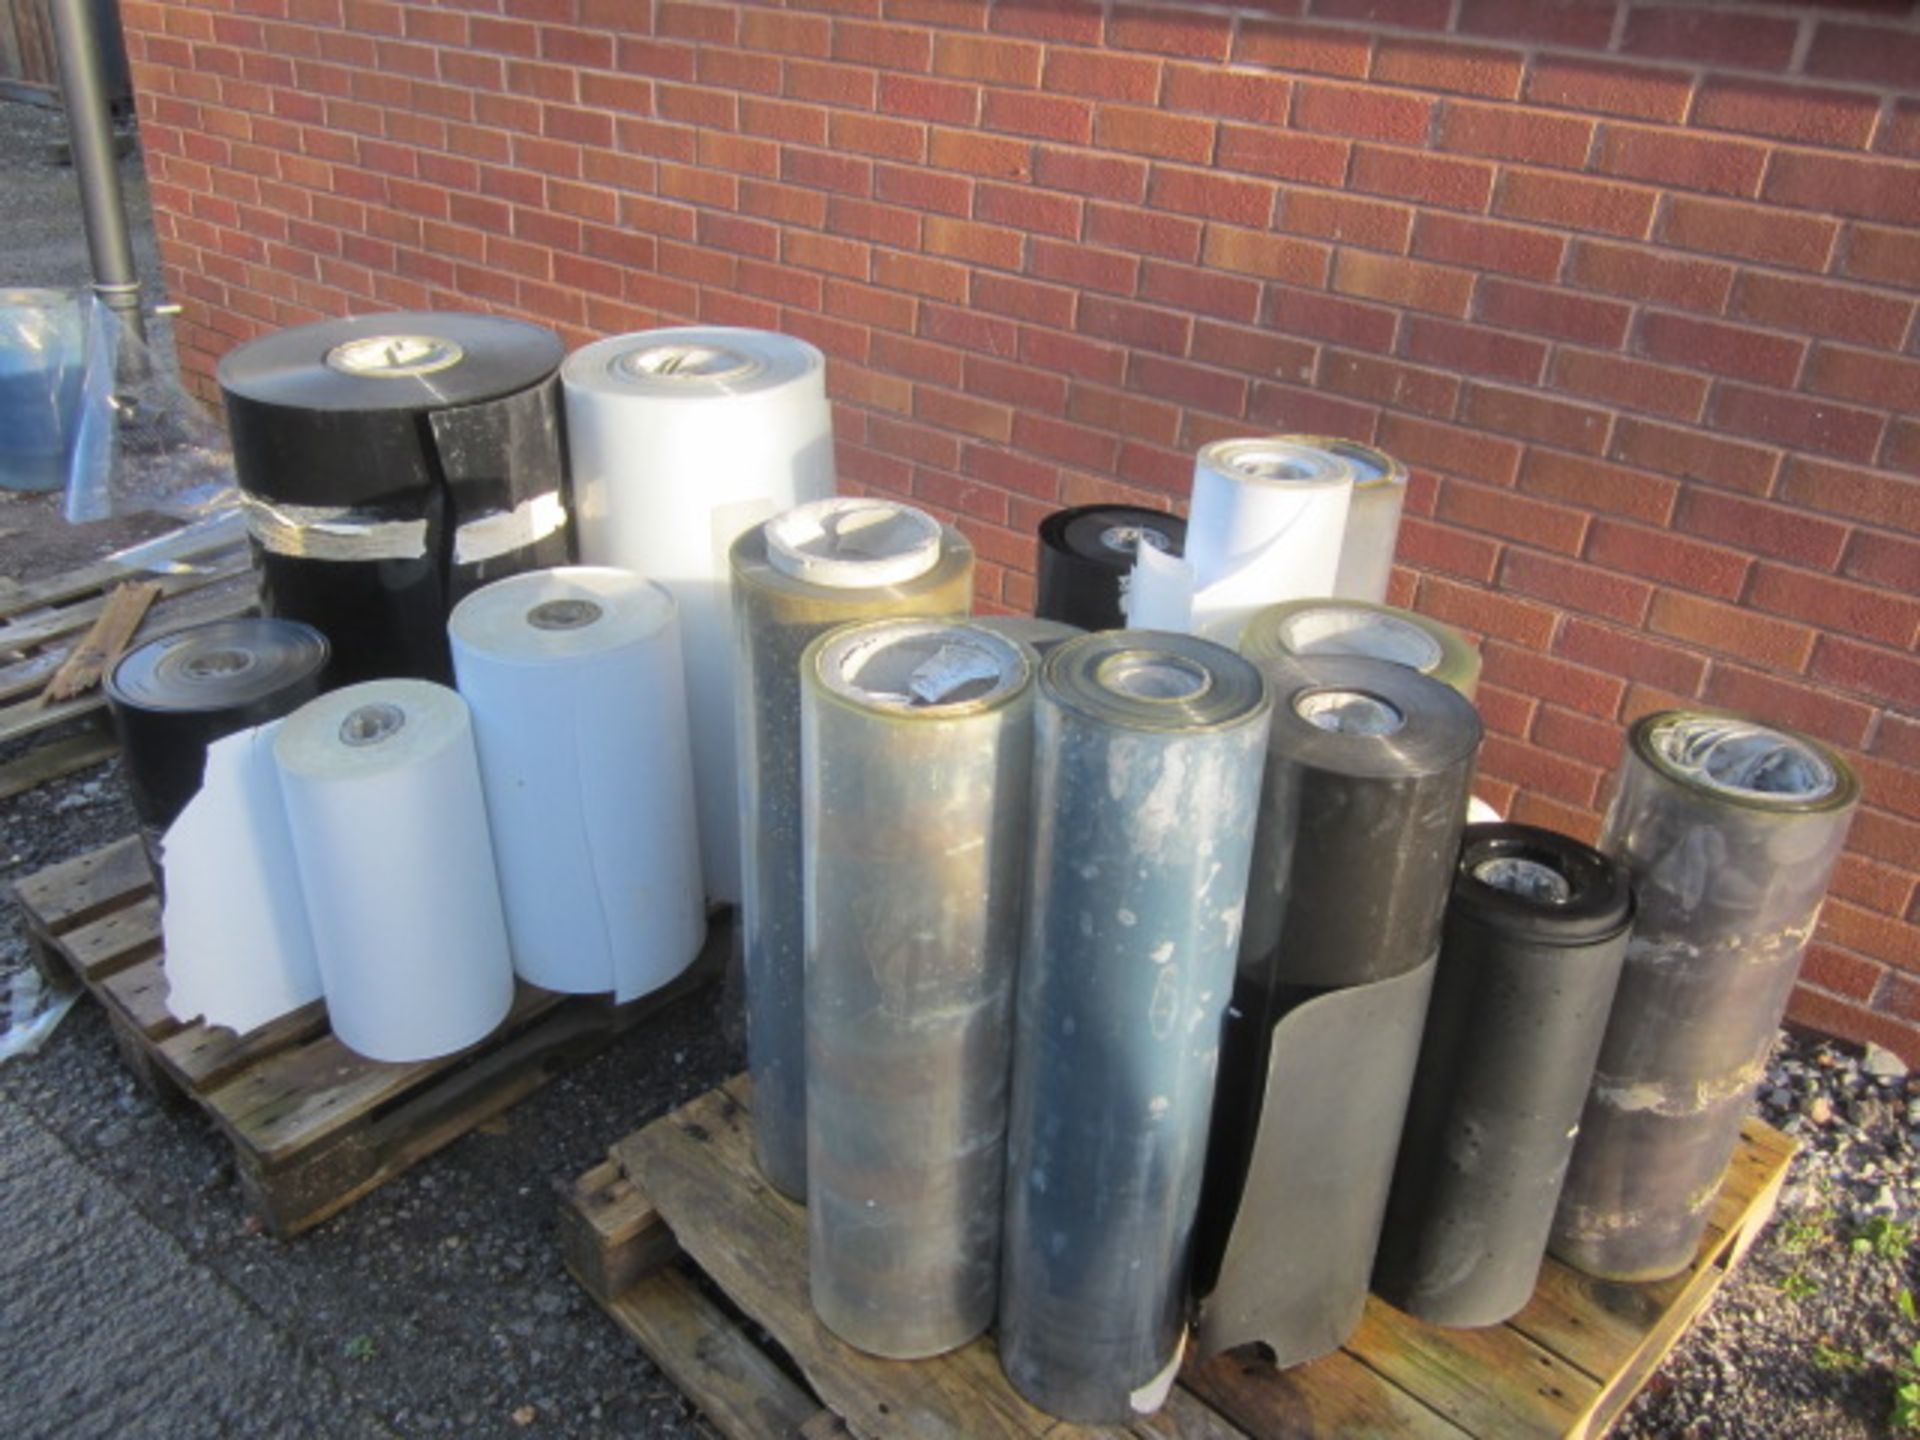 Assorted part reels of Apet film stock, approx. 85 - excluding racking. Located at Supreme - Image 12 of 12